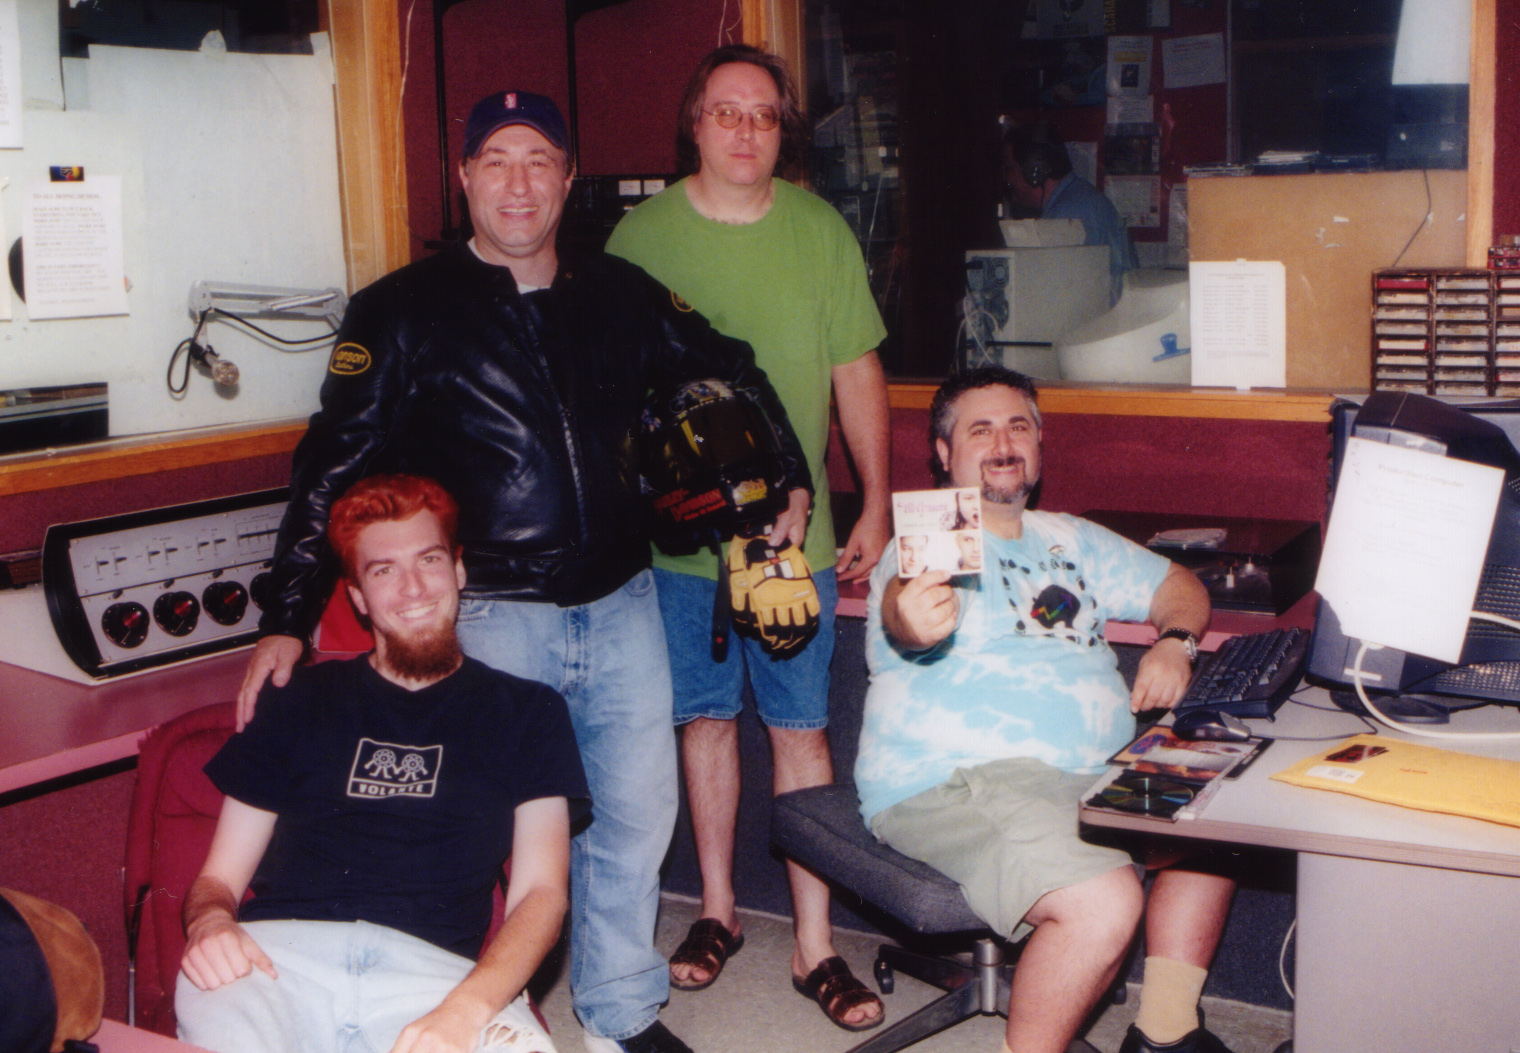 2006 - Hanging out in Prouction - Jared Miden, Unknown, Geoffe Pape, Bill Stella